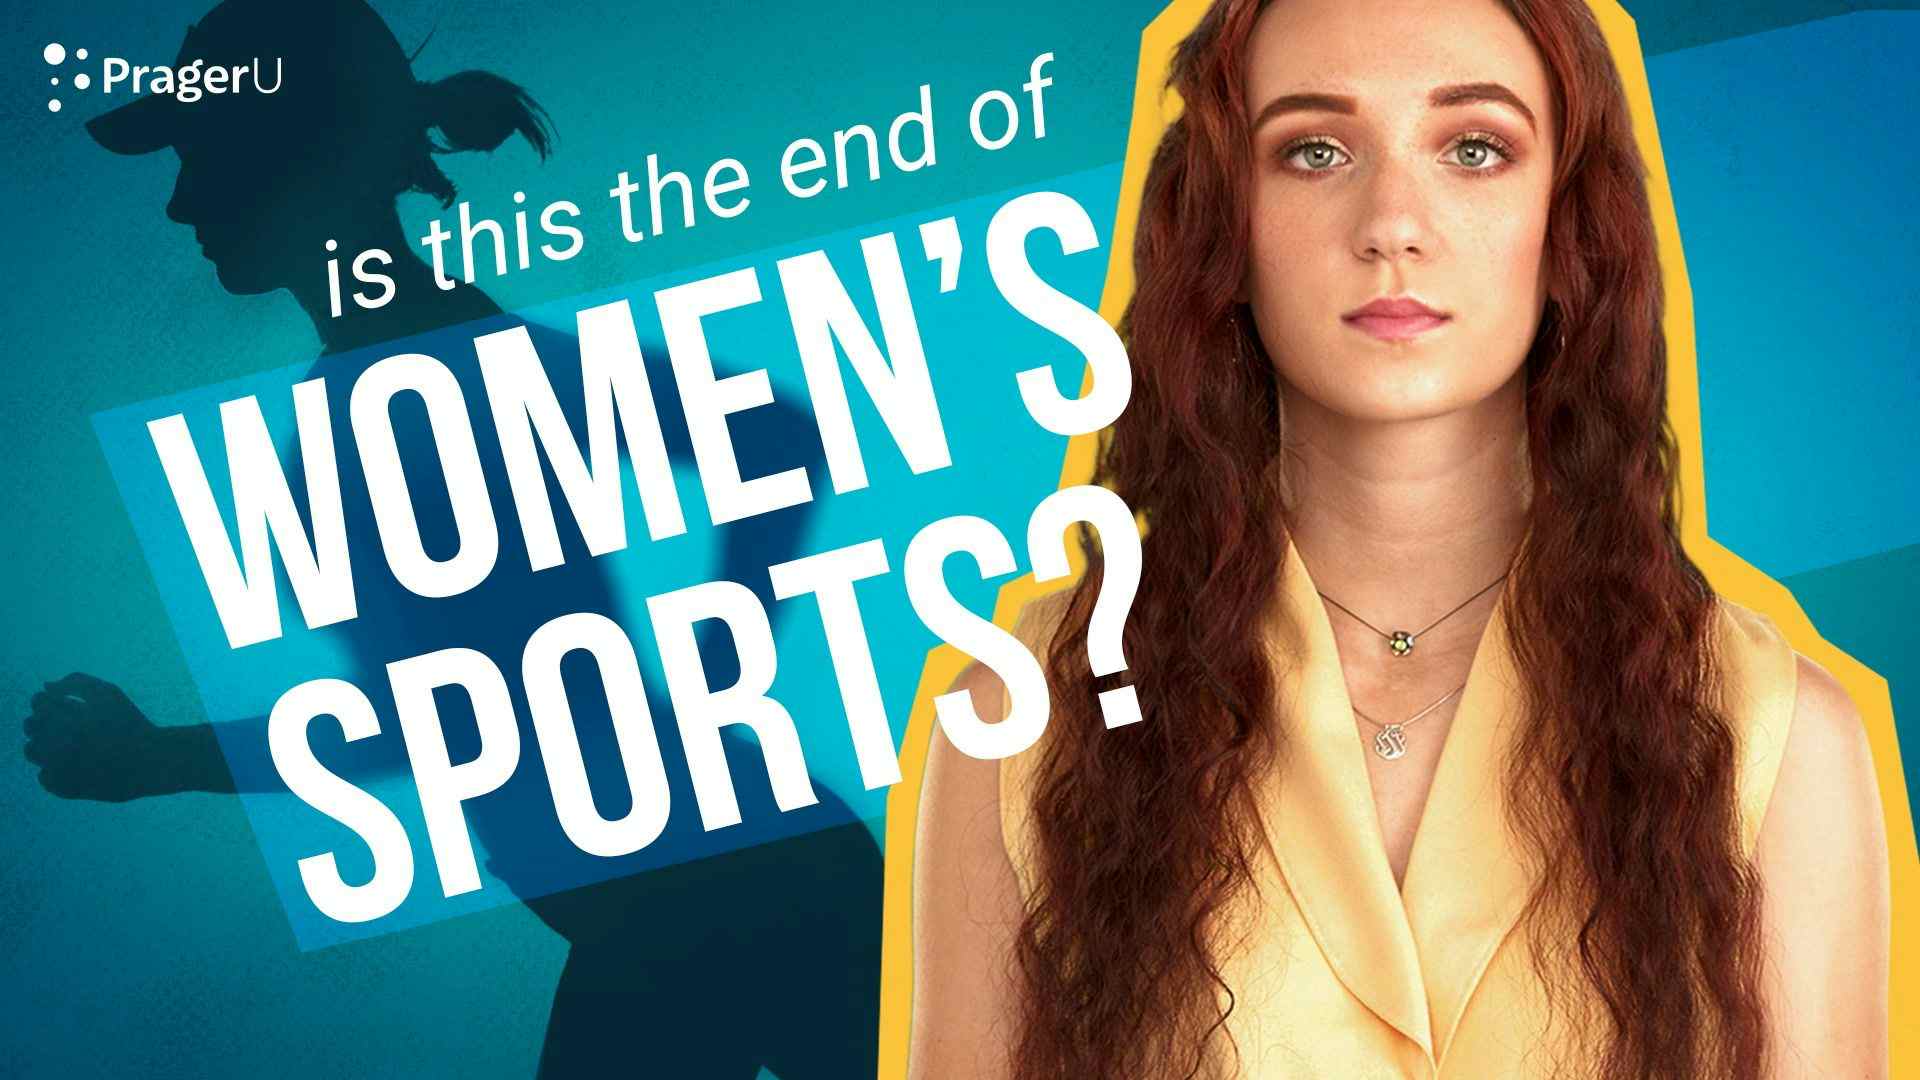 Is This the End of Women's Sports?